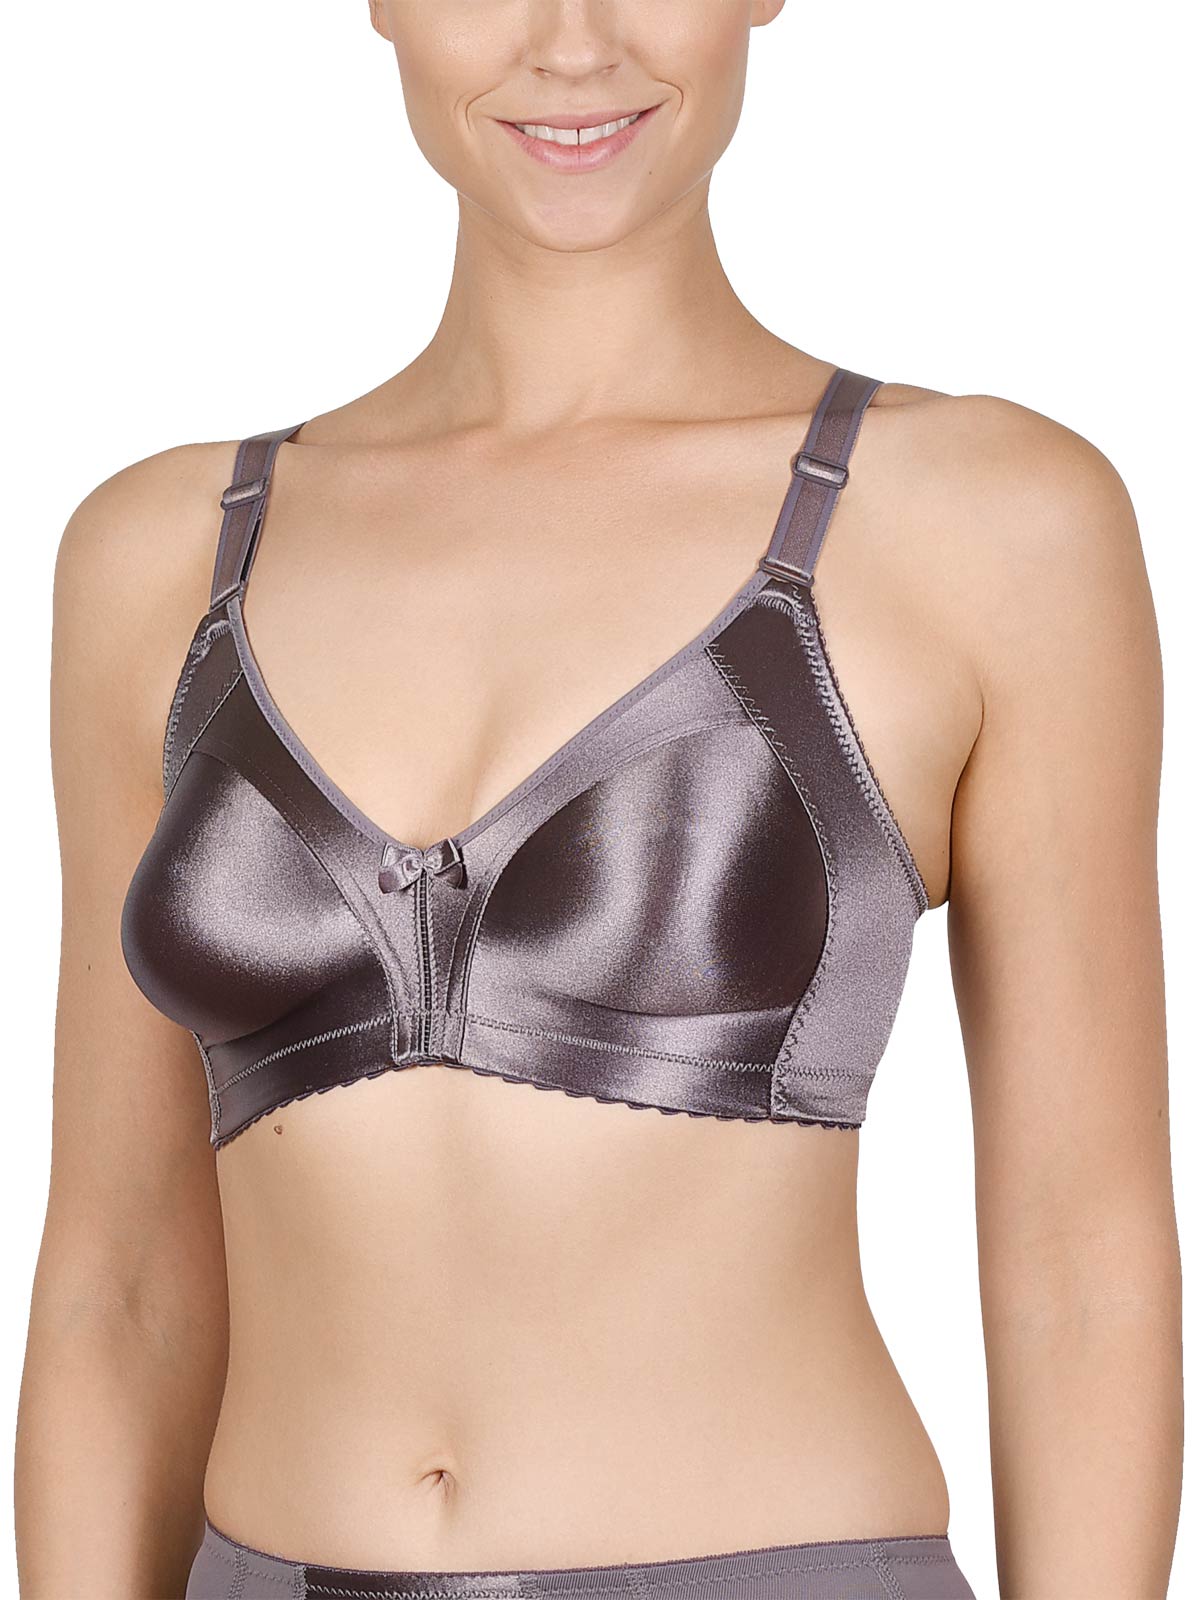 Naturana Firm Support Soft Cup Plus Size Bra